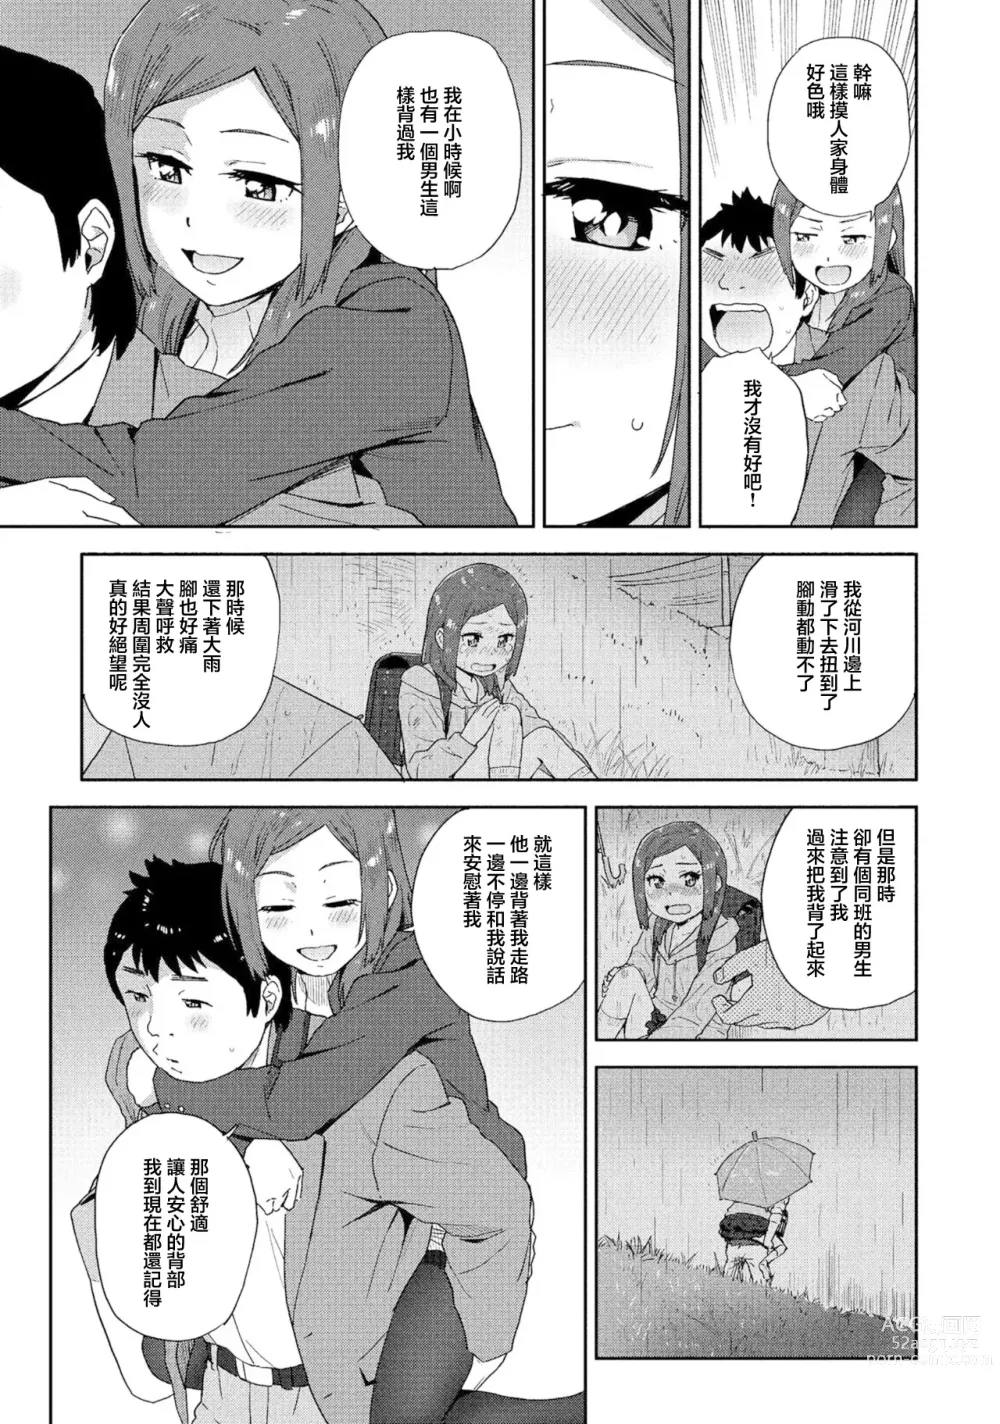 Page 9 of doujinshi 可靠依賴性